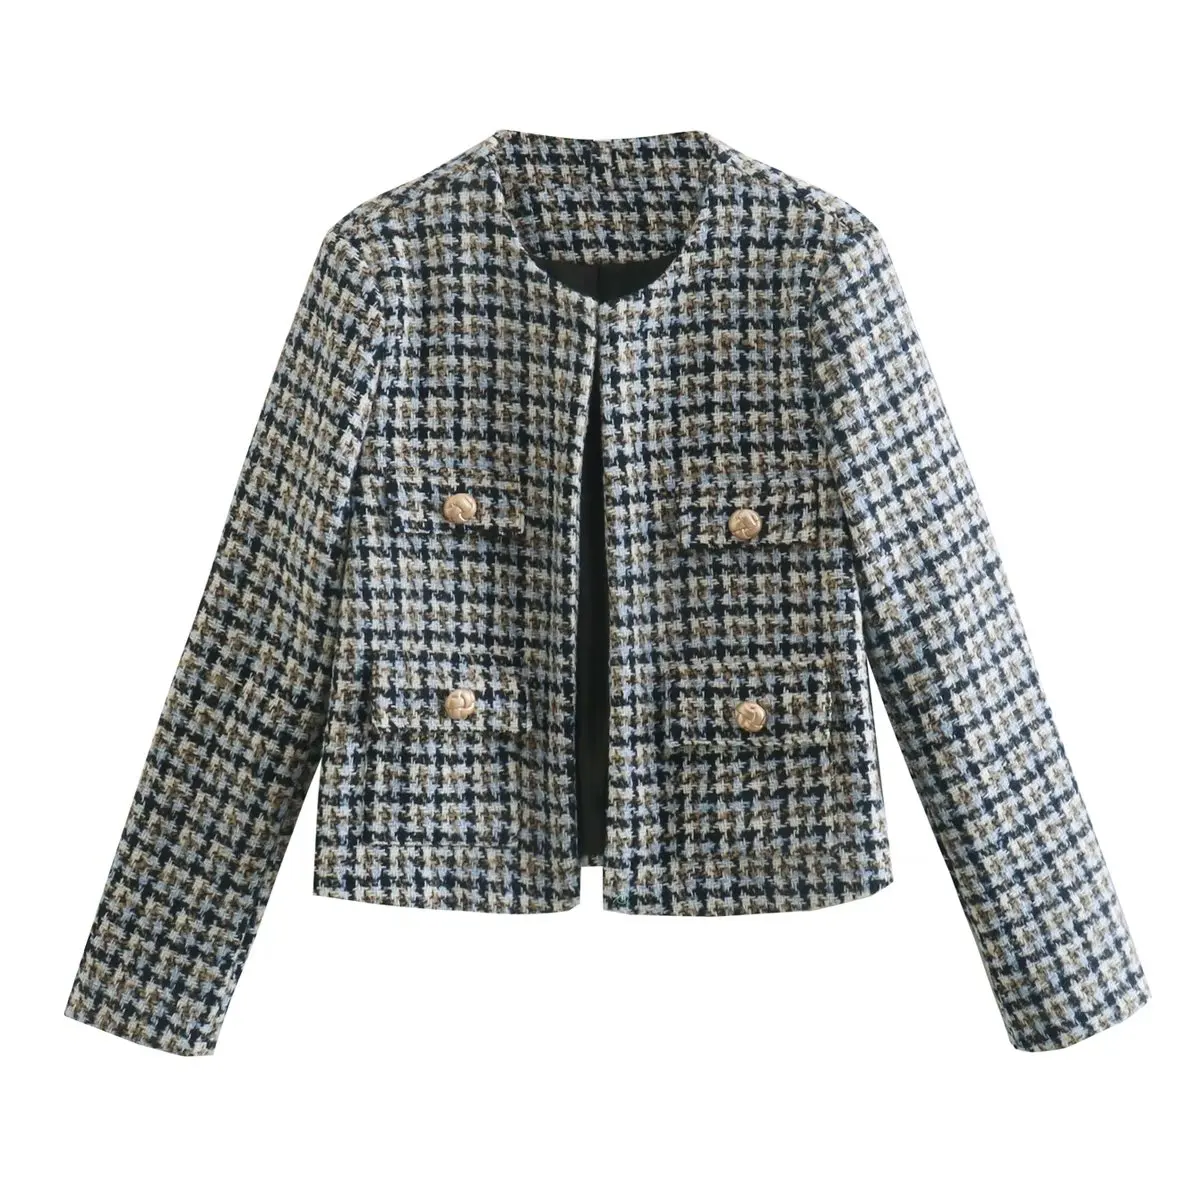 

Textured Women's Fashion Jackets Tailored Woman Open Coat Multicolor Cropped Houndstooth Blazers Suit Outerwear Spring Coats